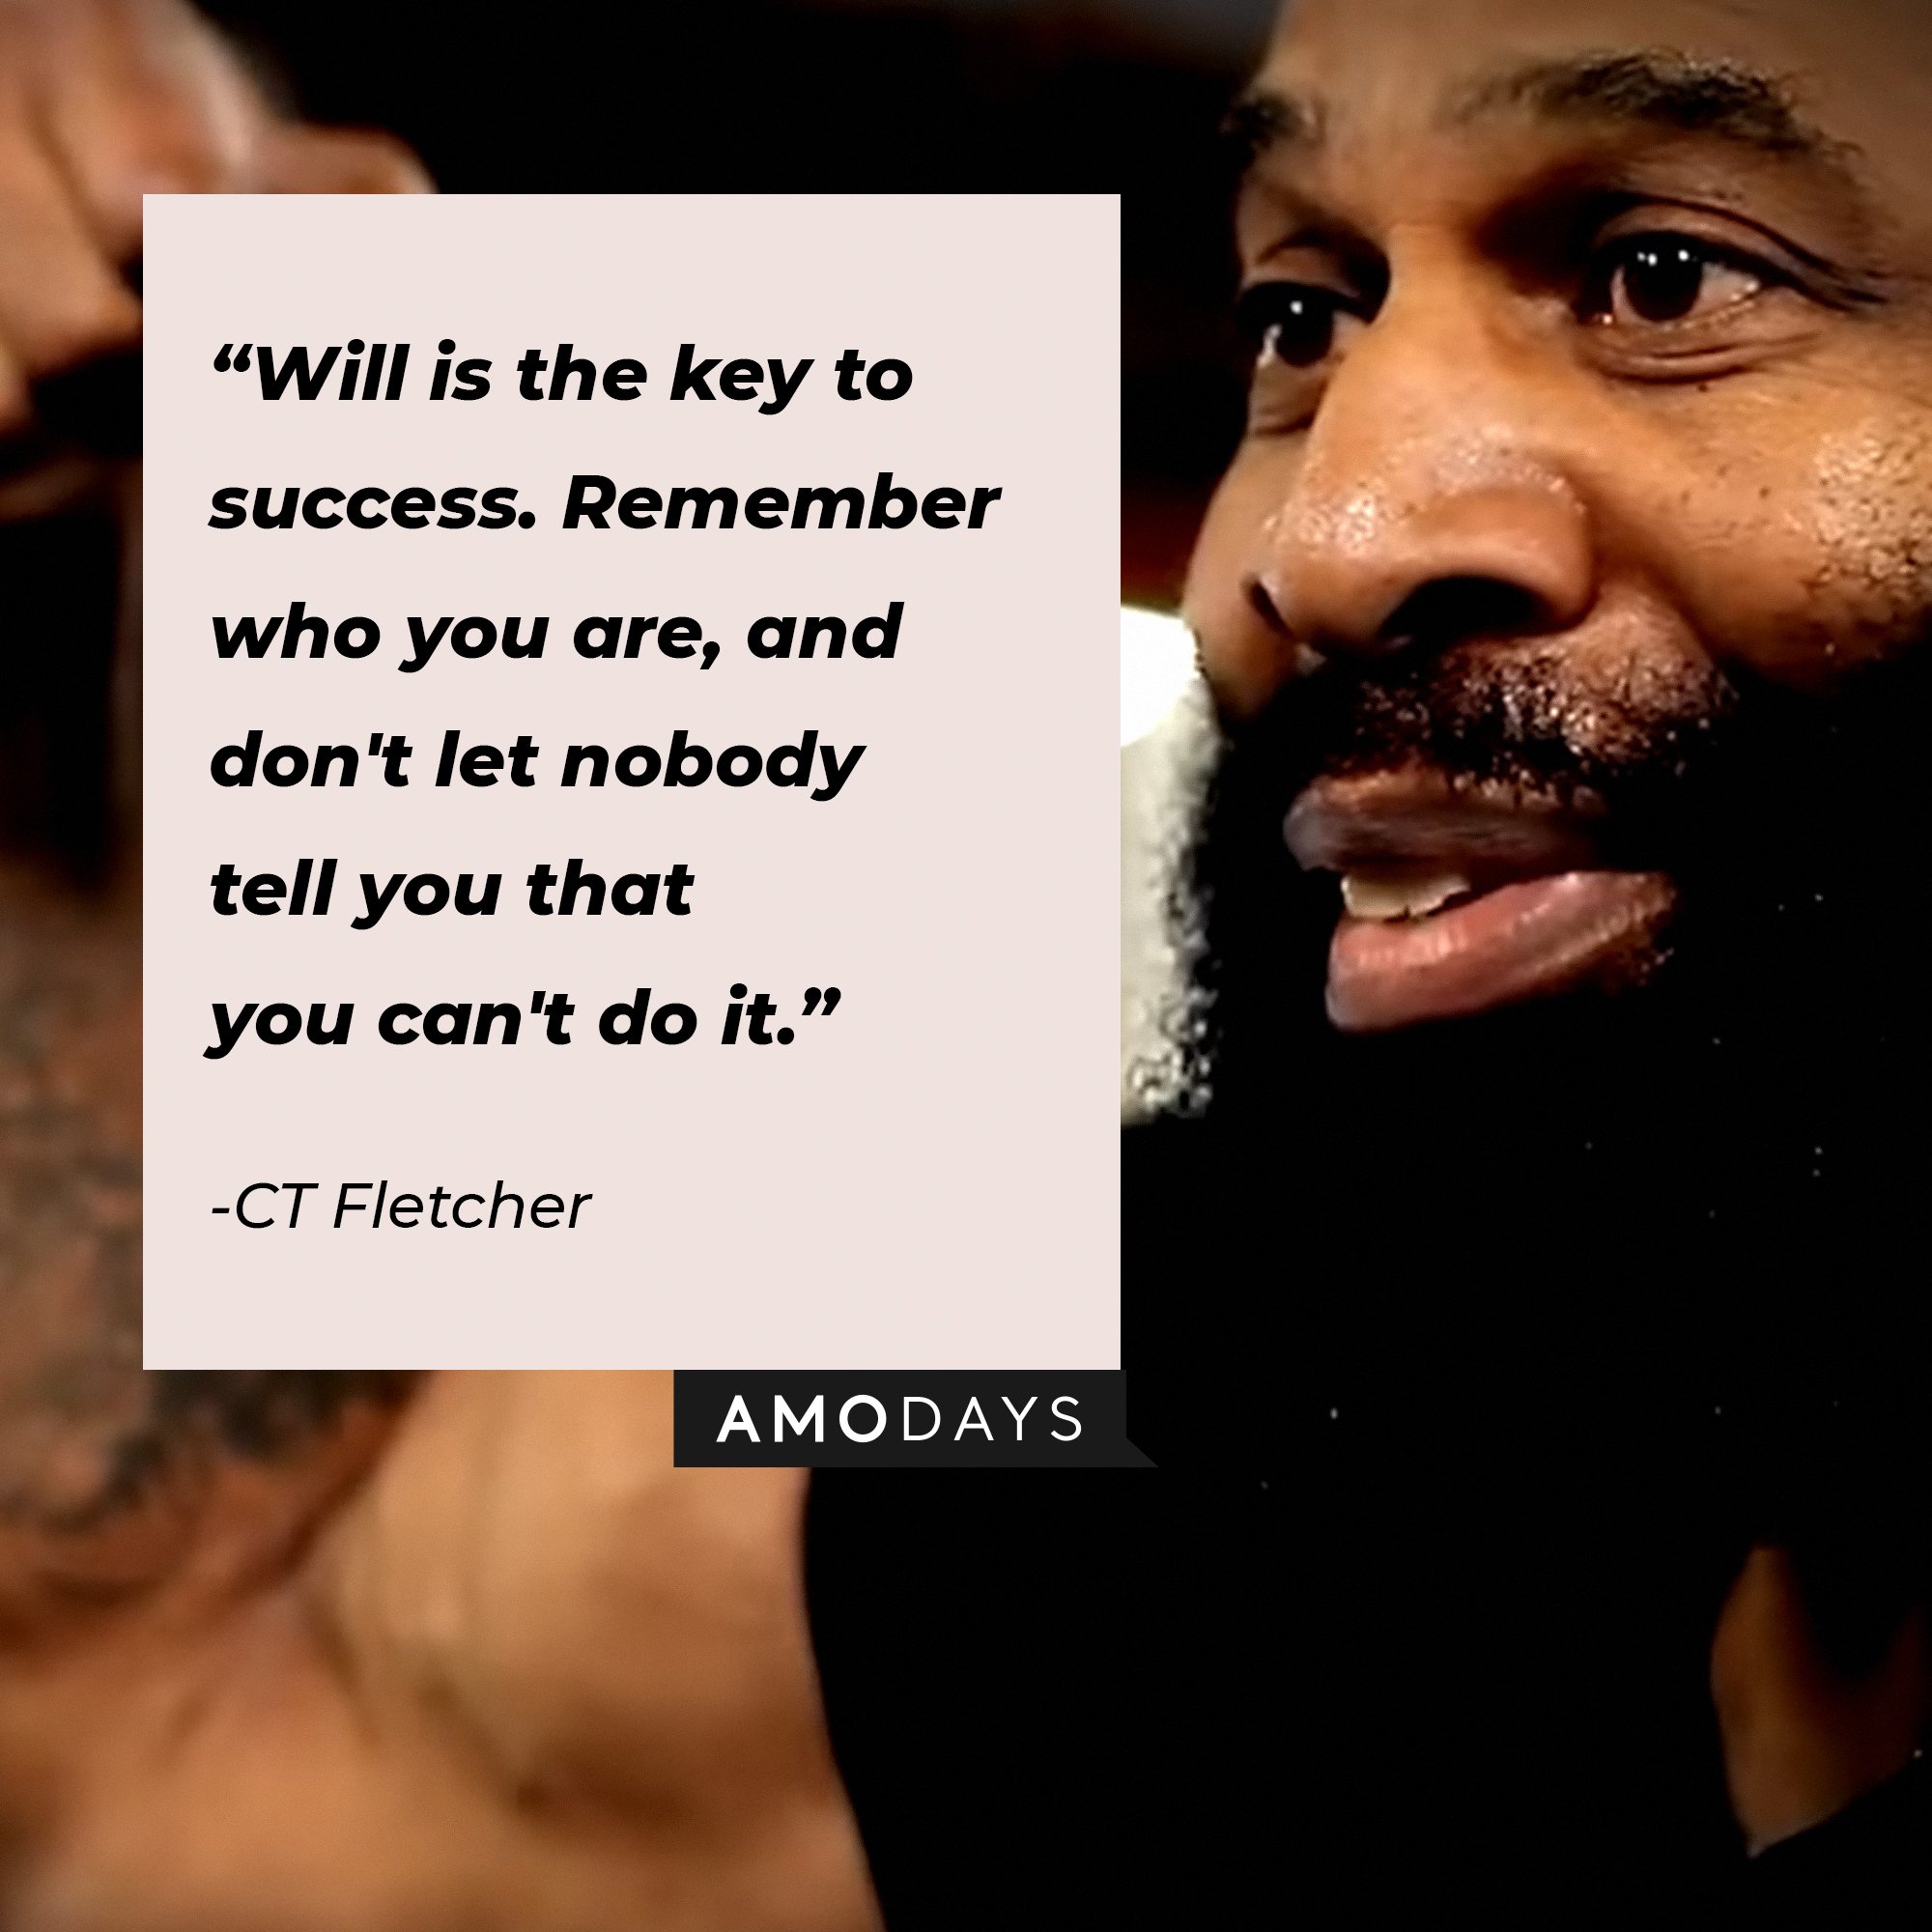 CT Fletcher's quote:\\\\\\\\u00a0"Will is the key to success. Remember who you are, and don't let nobody tell you that you can't do it."\\\\\\\\u00a0| Image: AmoDays